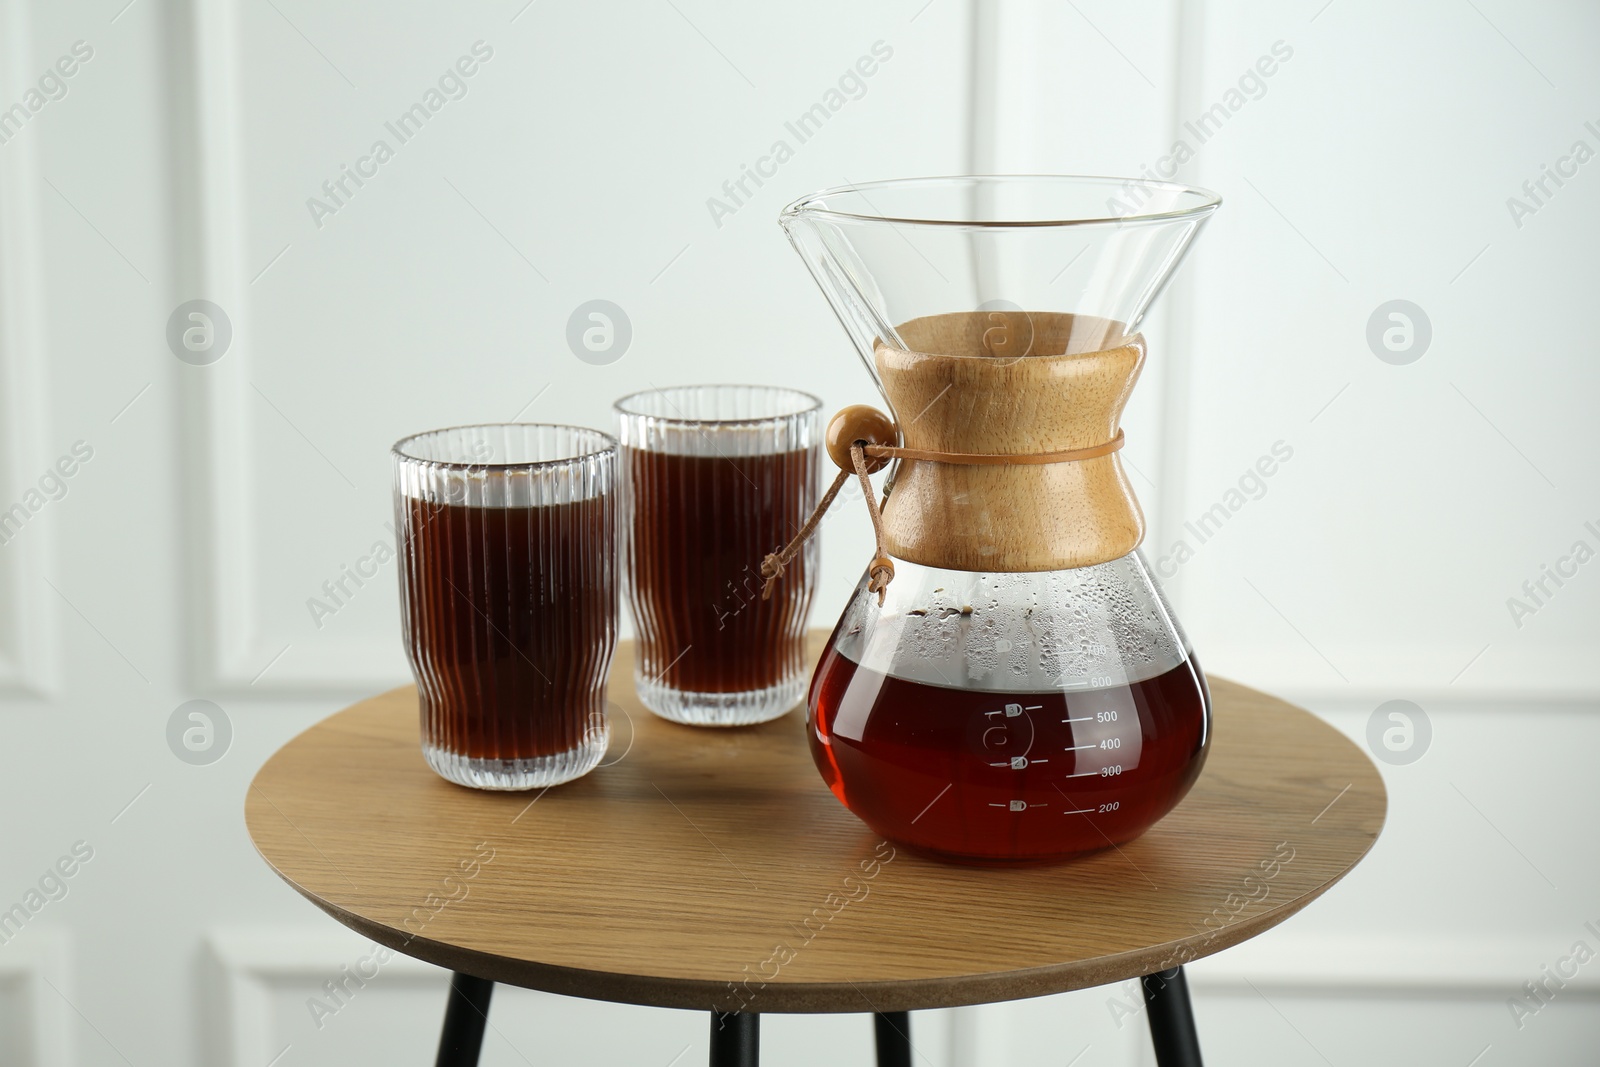 Photo of Glass chemex coffeemaker and glasses of coffee on wooden table against white wall